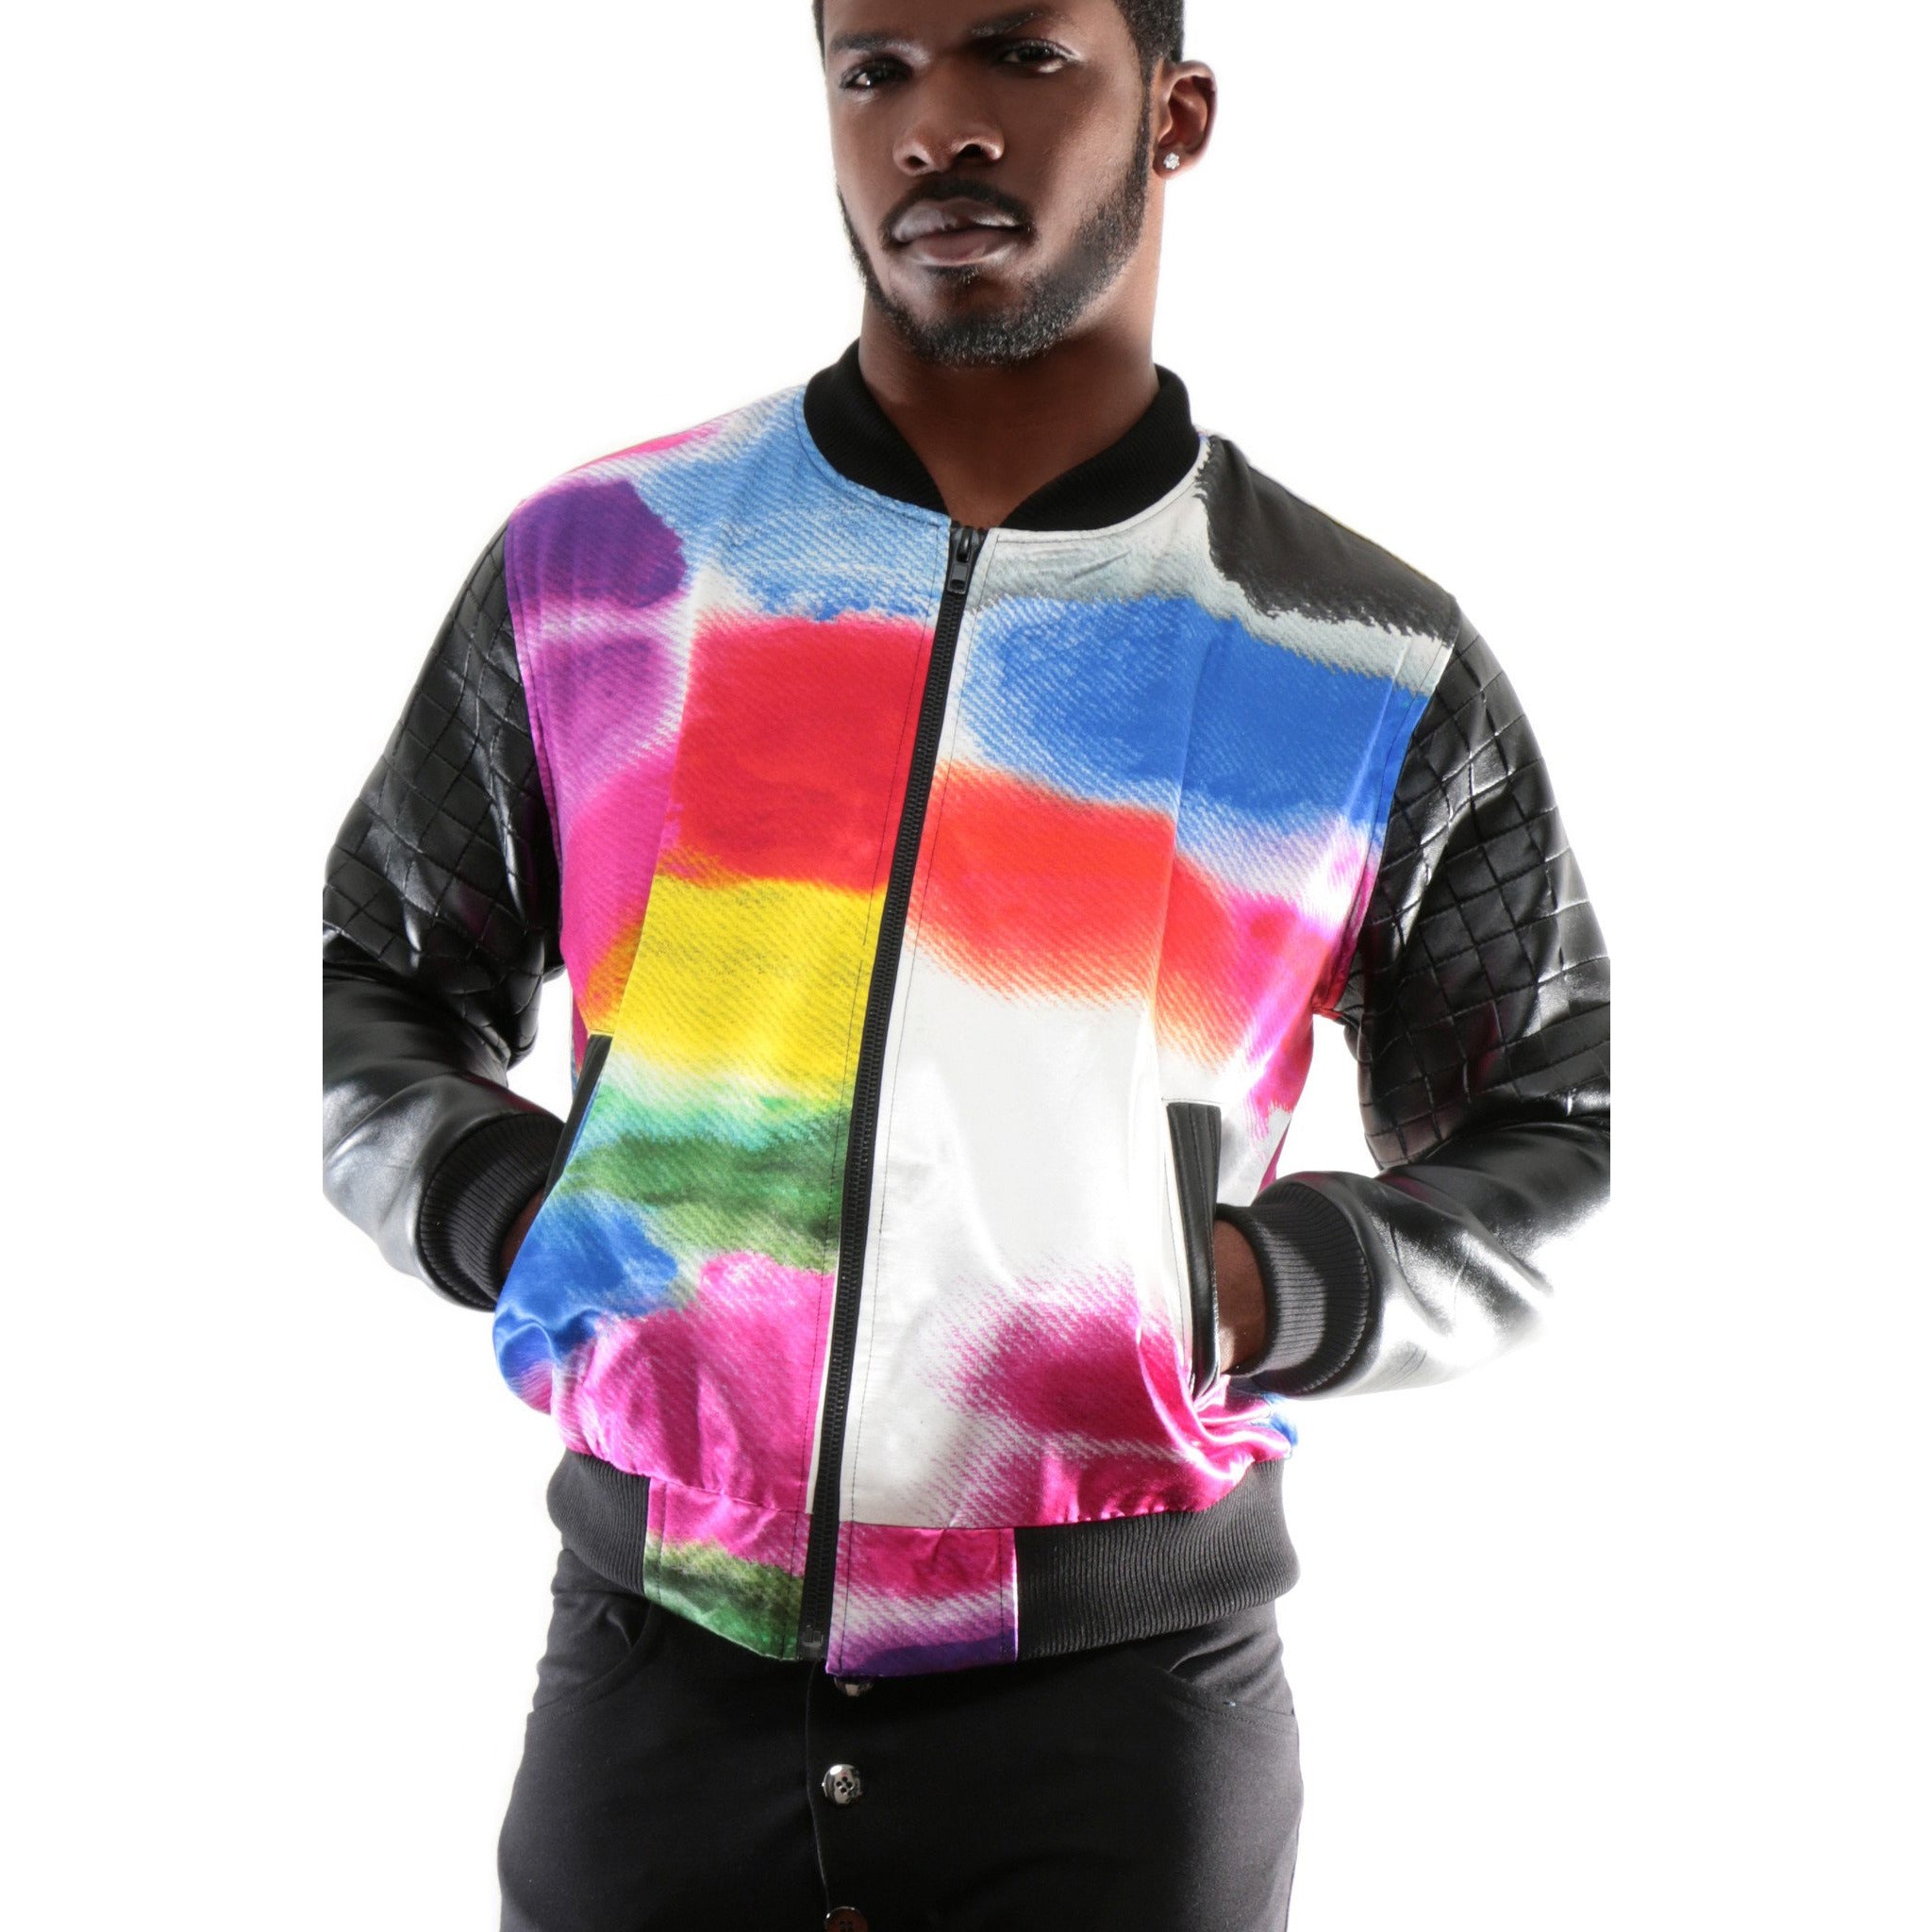 Bomber Jacket with Color patch imprint